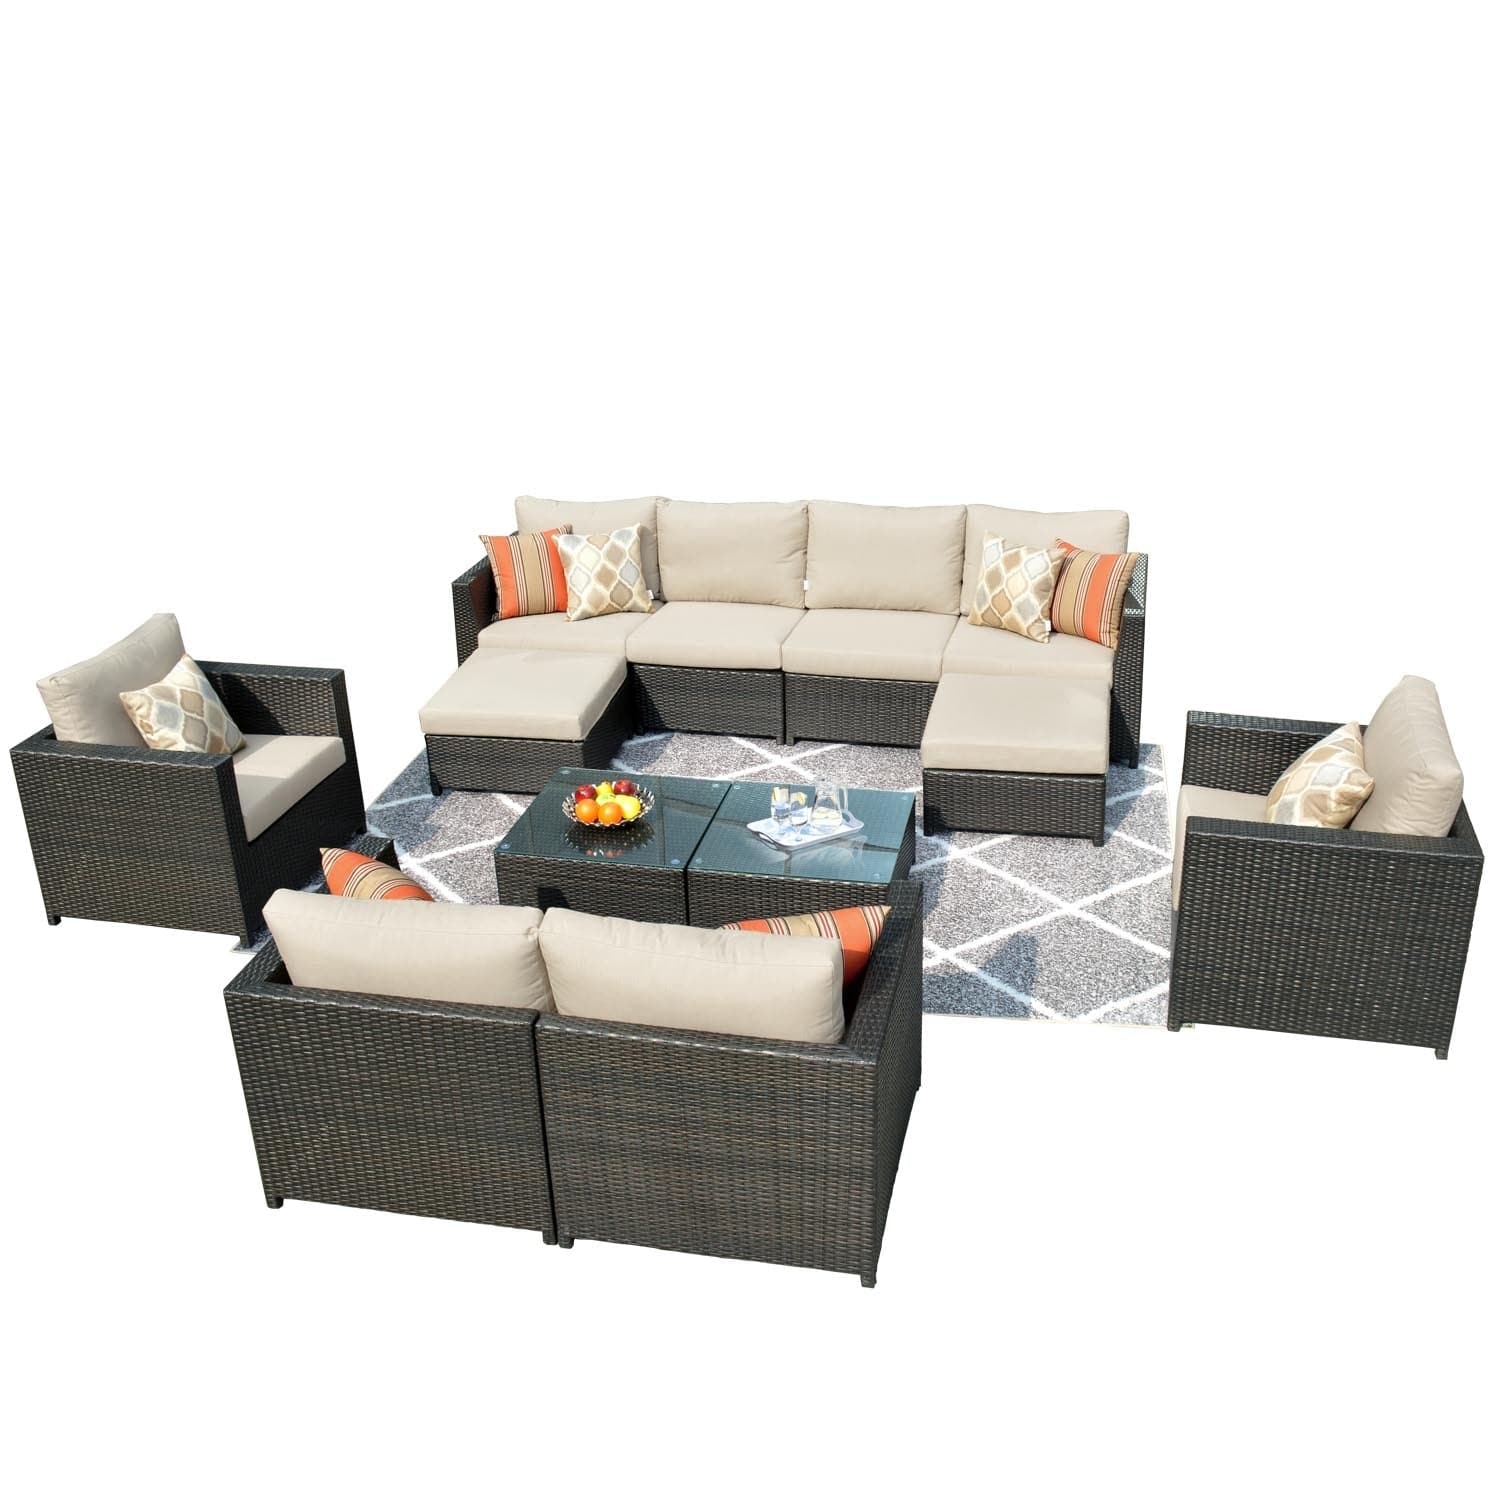 Ovios Patio Furniture Set Bigger Size Sunbrella 12-Piece, King Series, No Assembly Required, Couch is Separate